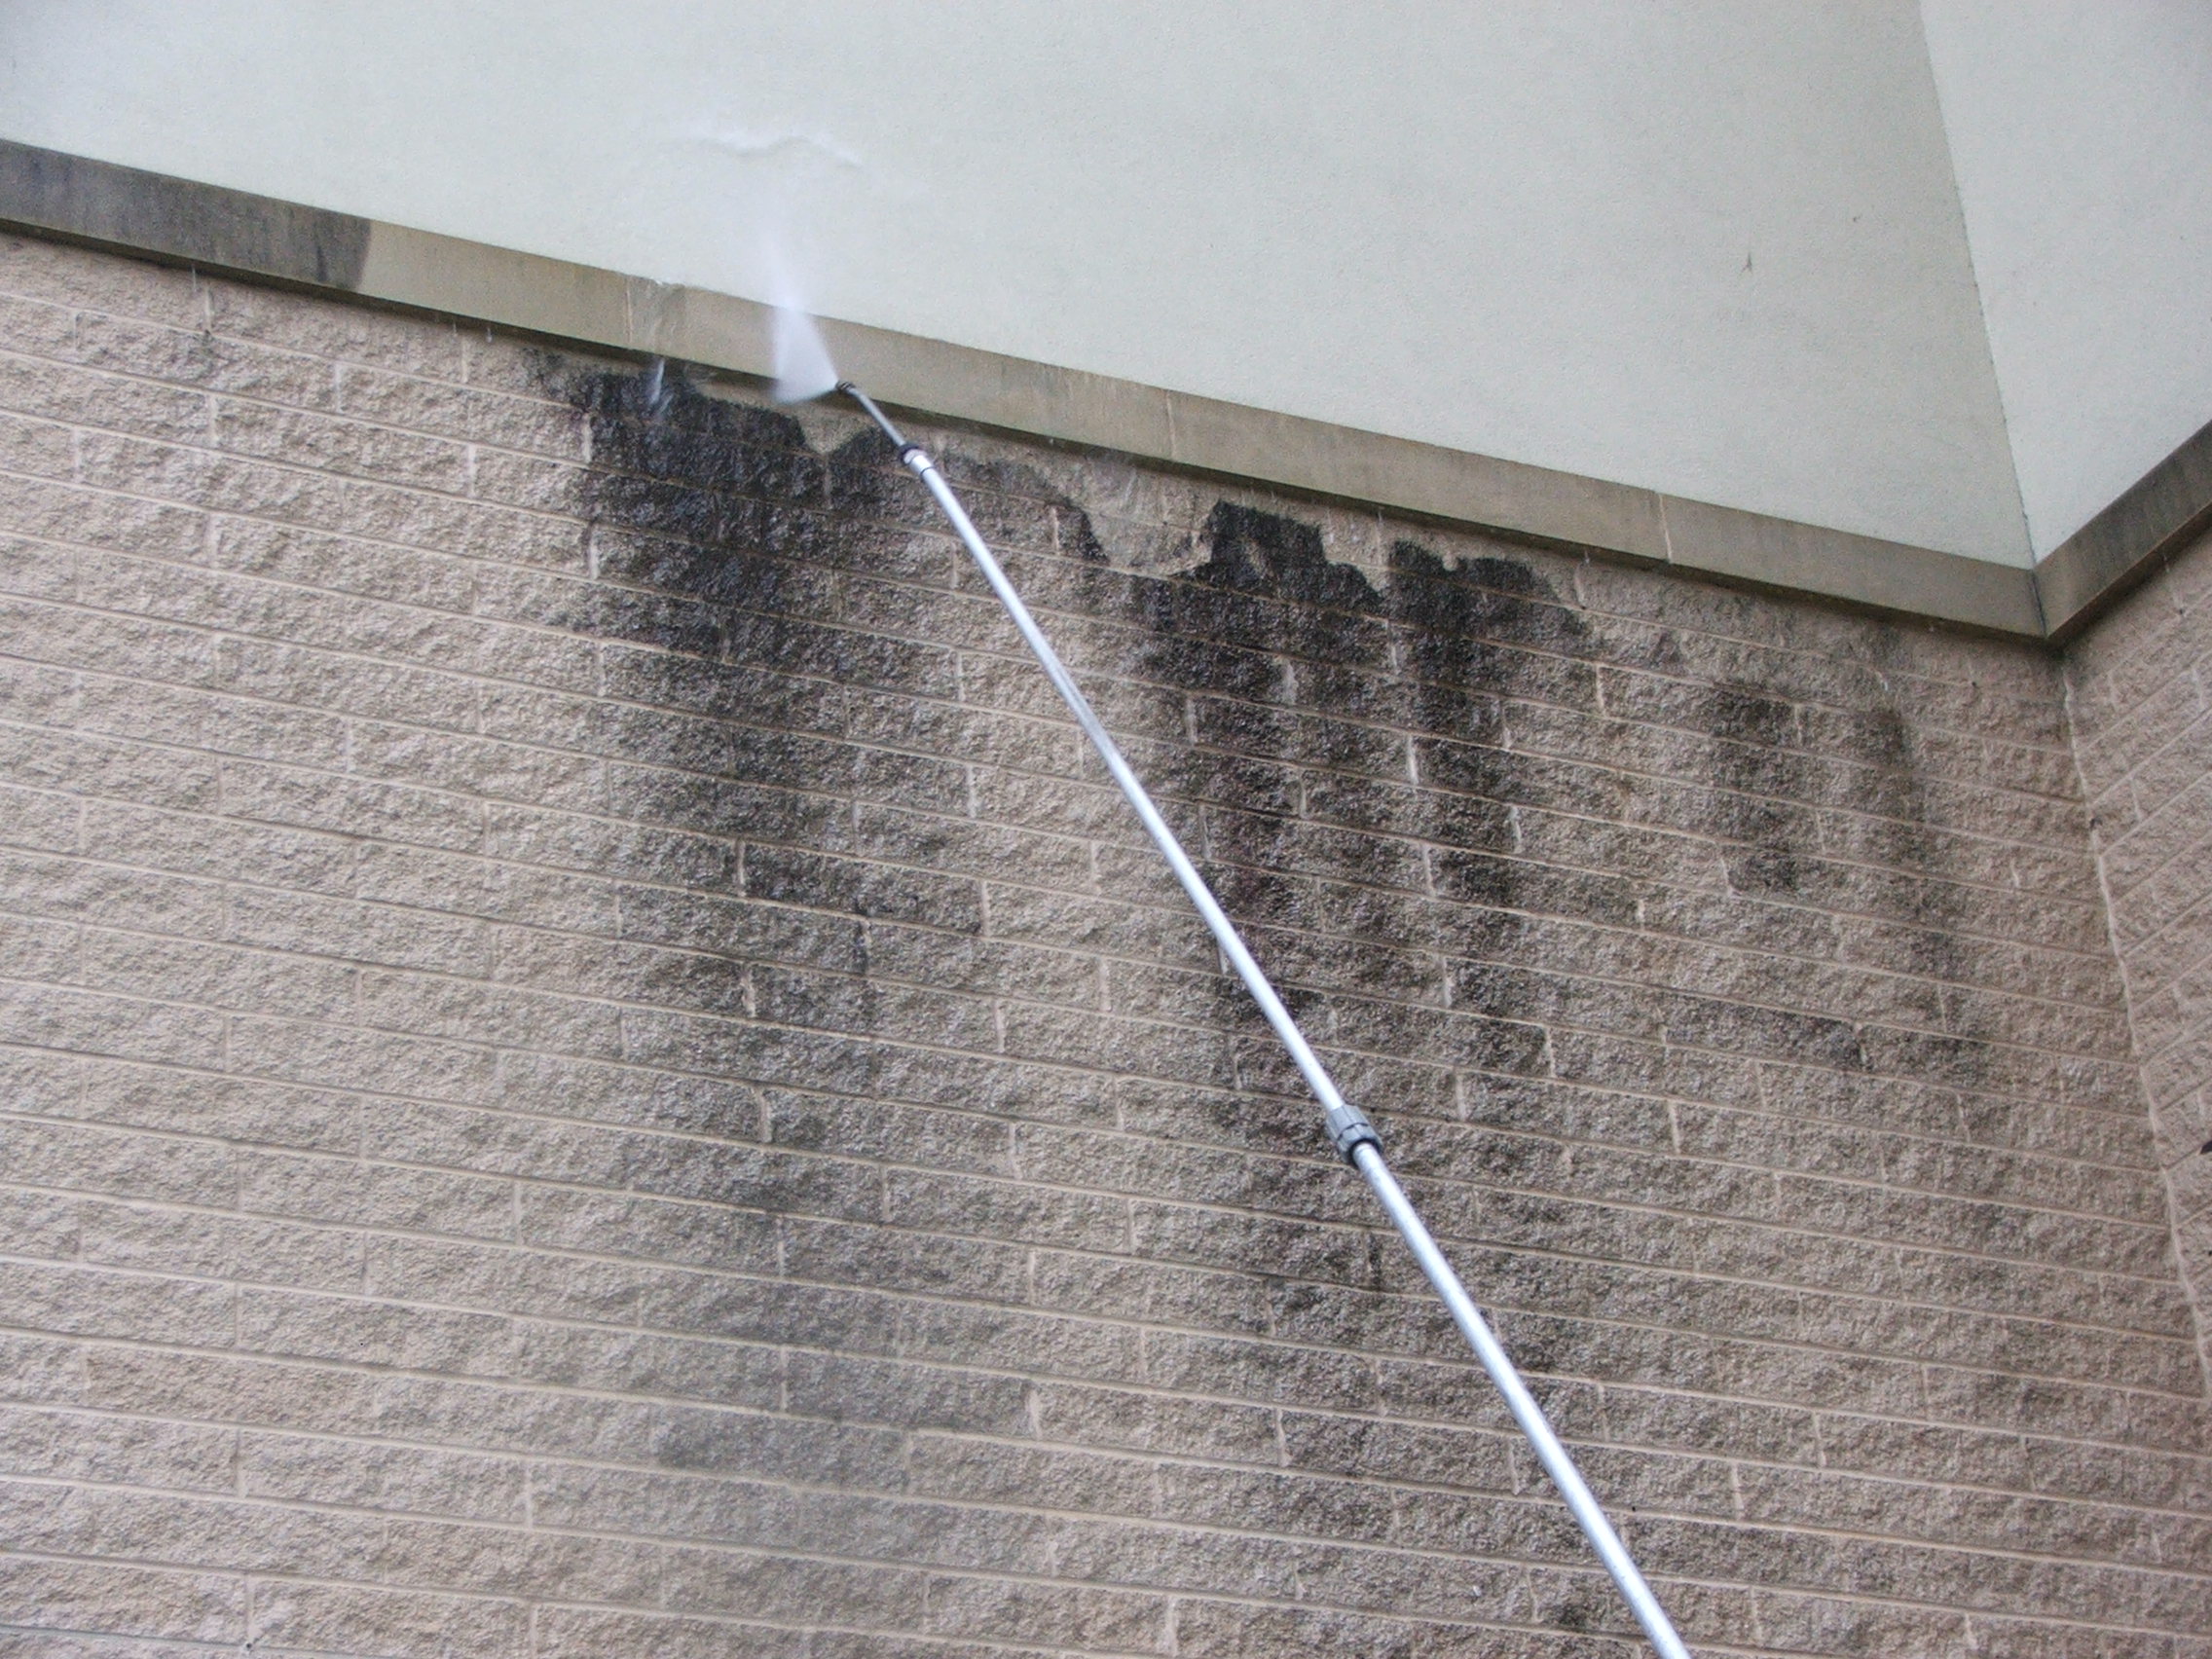 Masonry block wall pressure washing to remove black stains at a nursing home in Harrisburg.